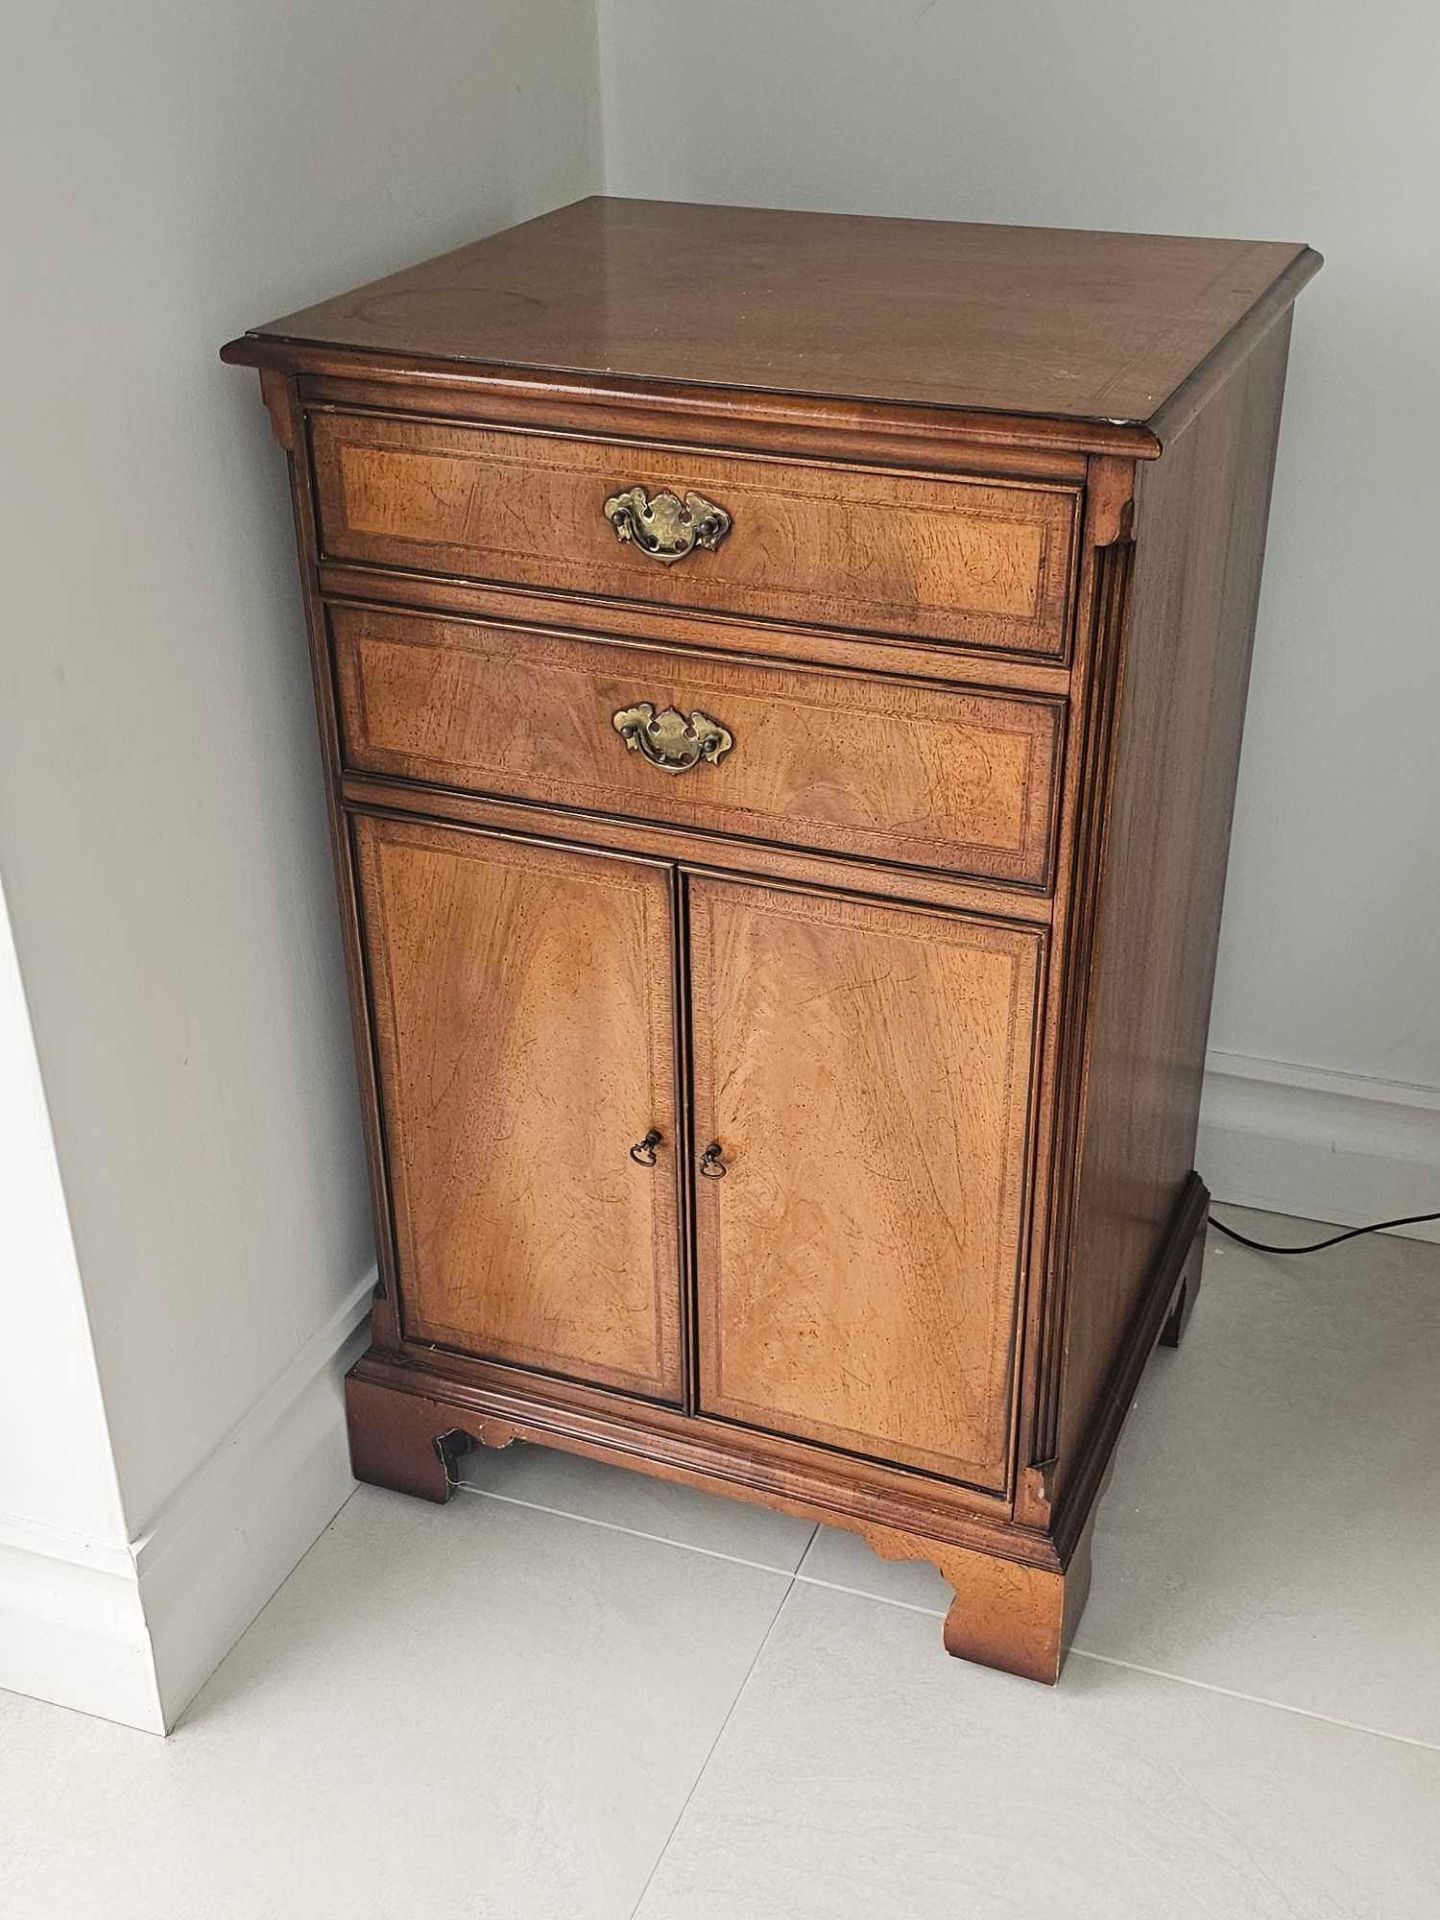 A Walnut Storage Cabinet With Simulated Drawer Front Panel Opens To Reveal 3 X Vertical Fitted